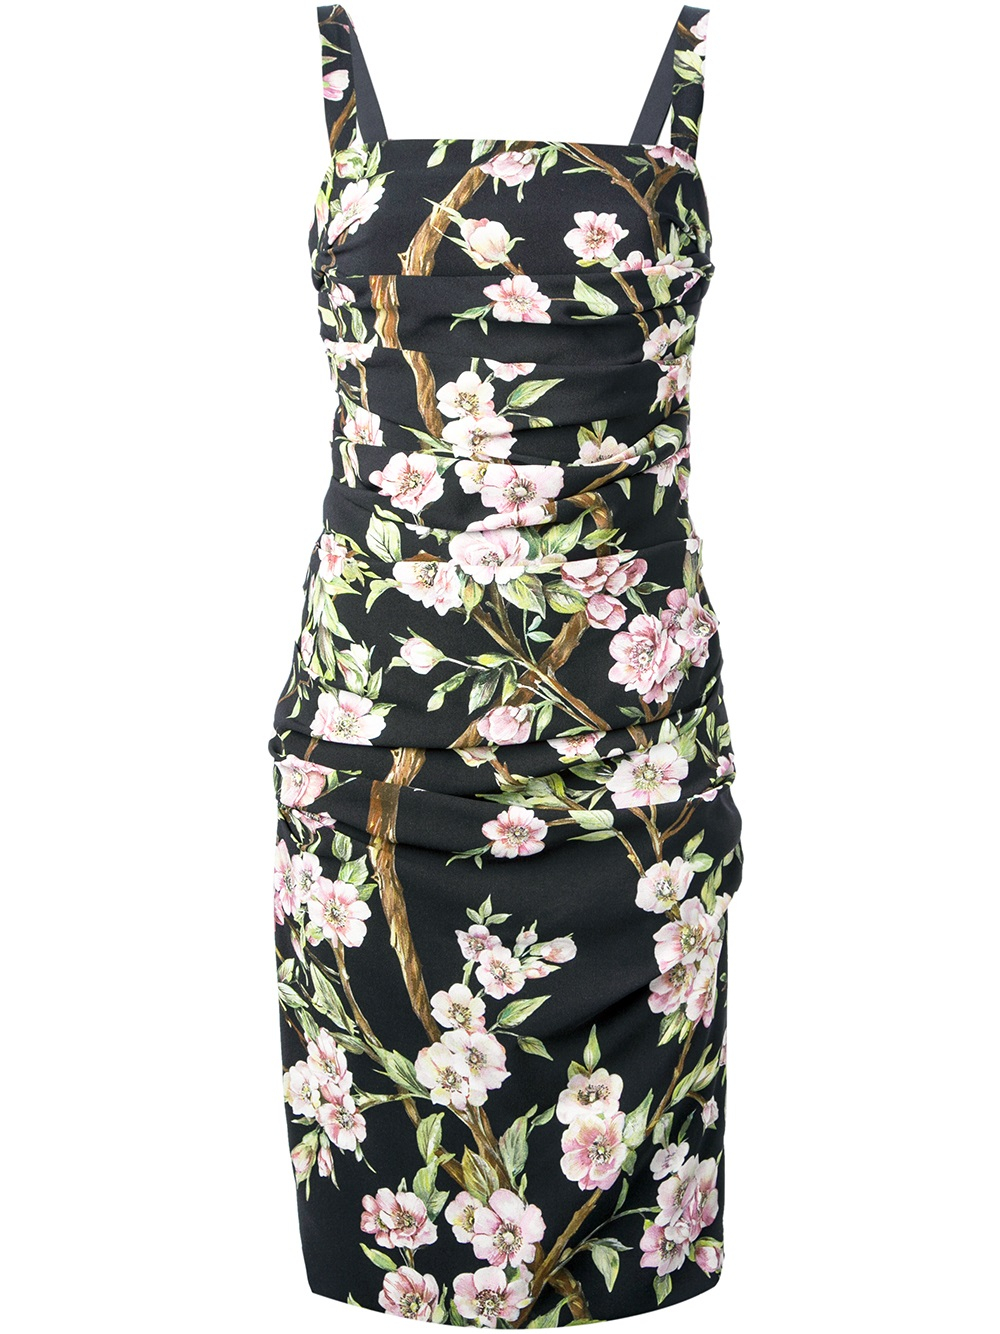 Lyst - Dolce & gabbana Fitted Floral Dress in Black